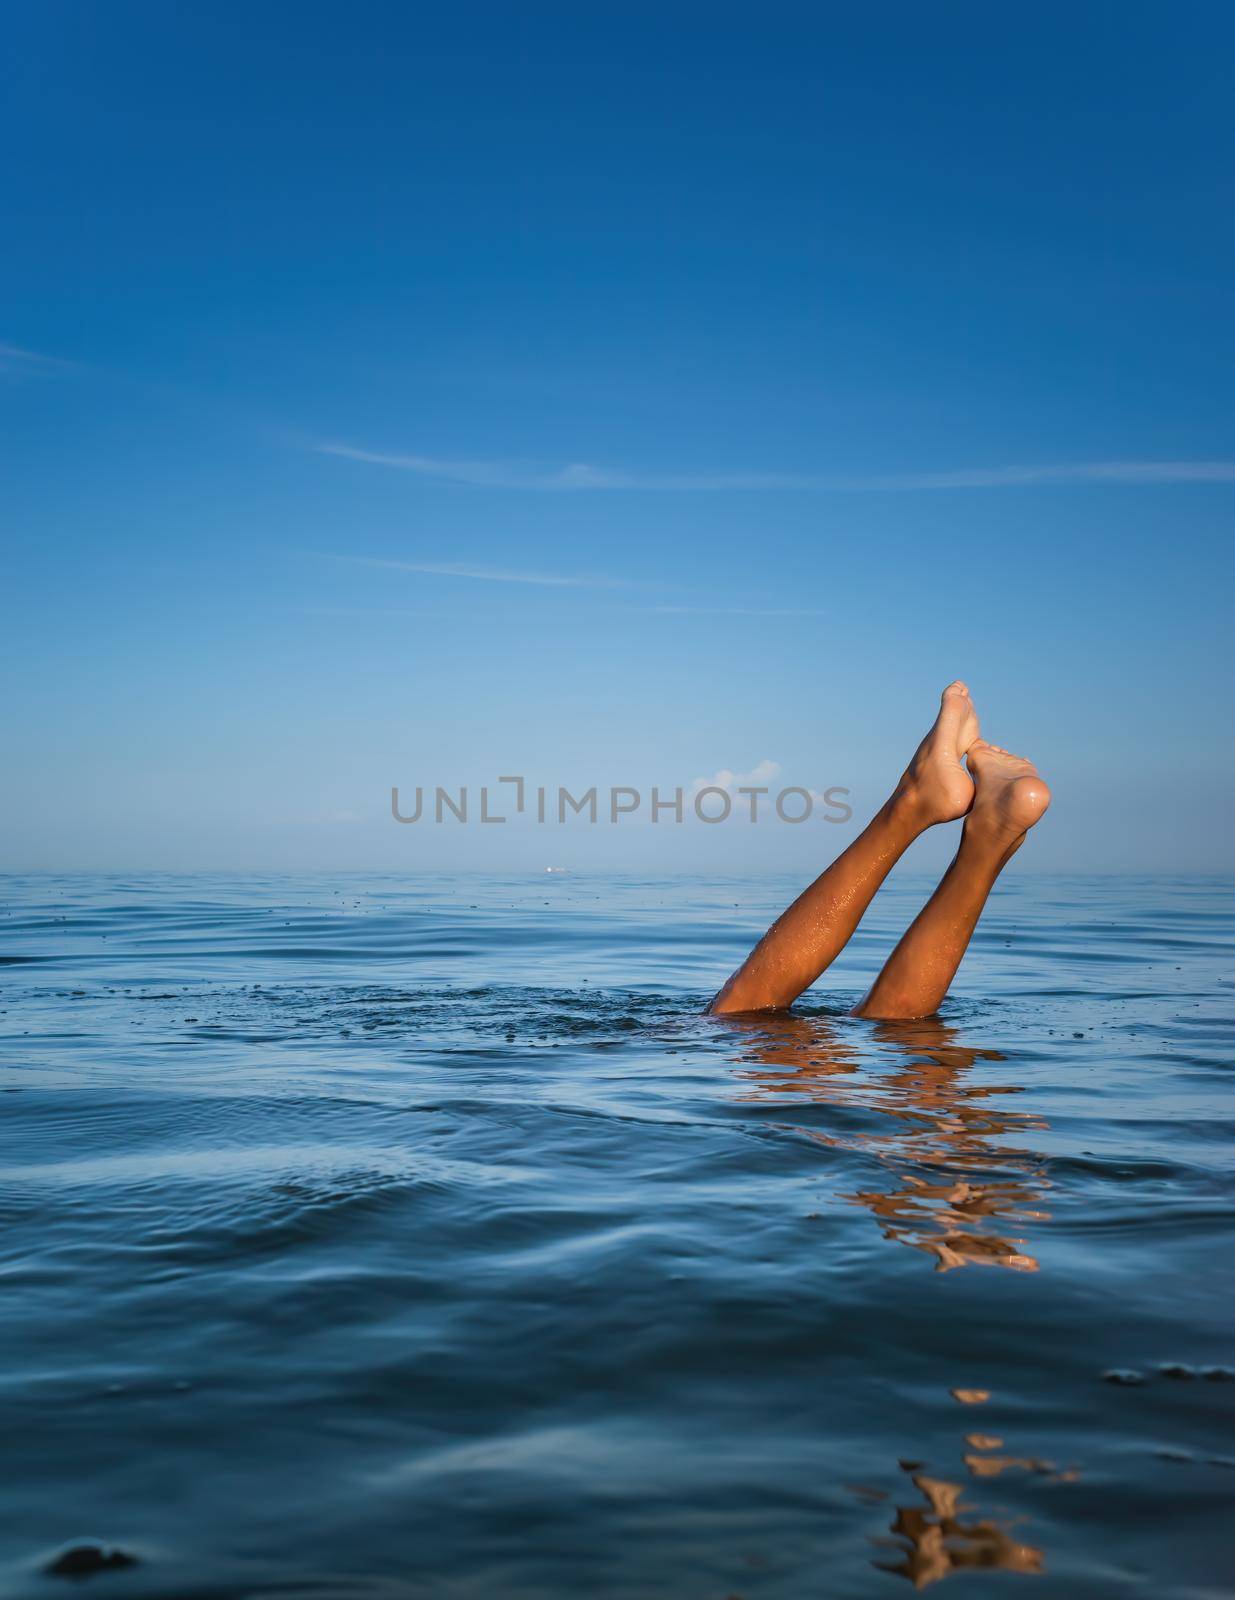 Relaxation and healthy lifestyle. Young boy teenager bathes in the sea. The boy dives and his legs stick out above the water